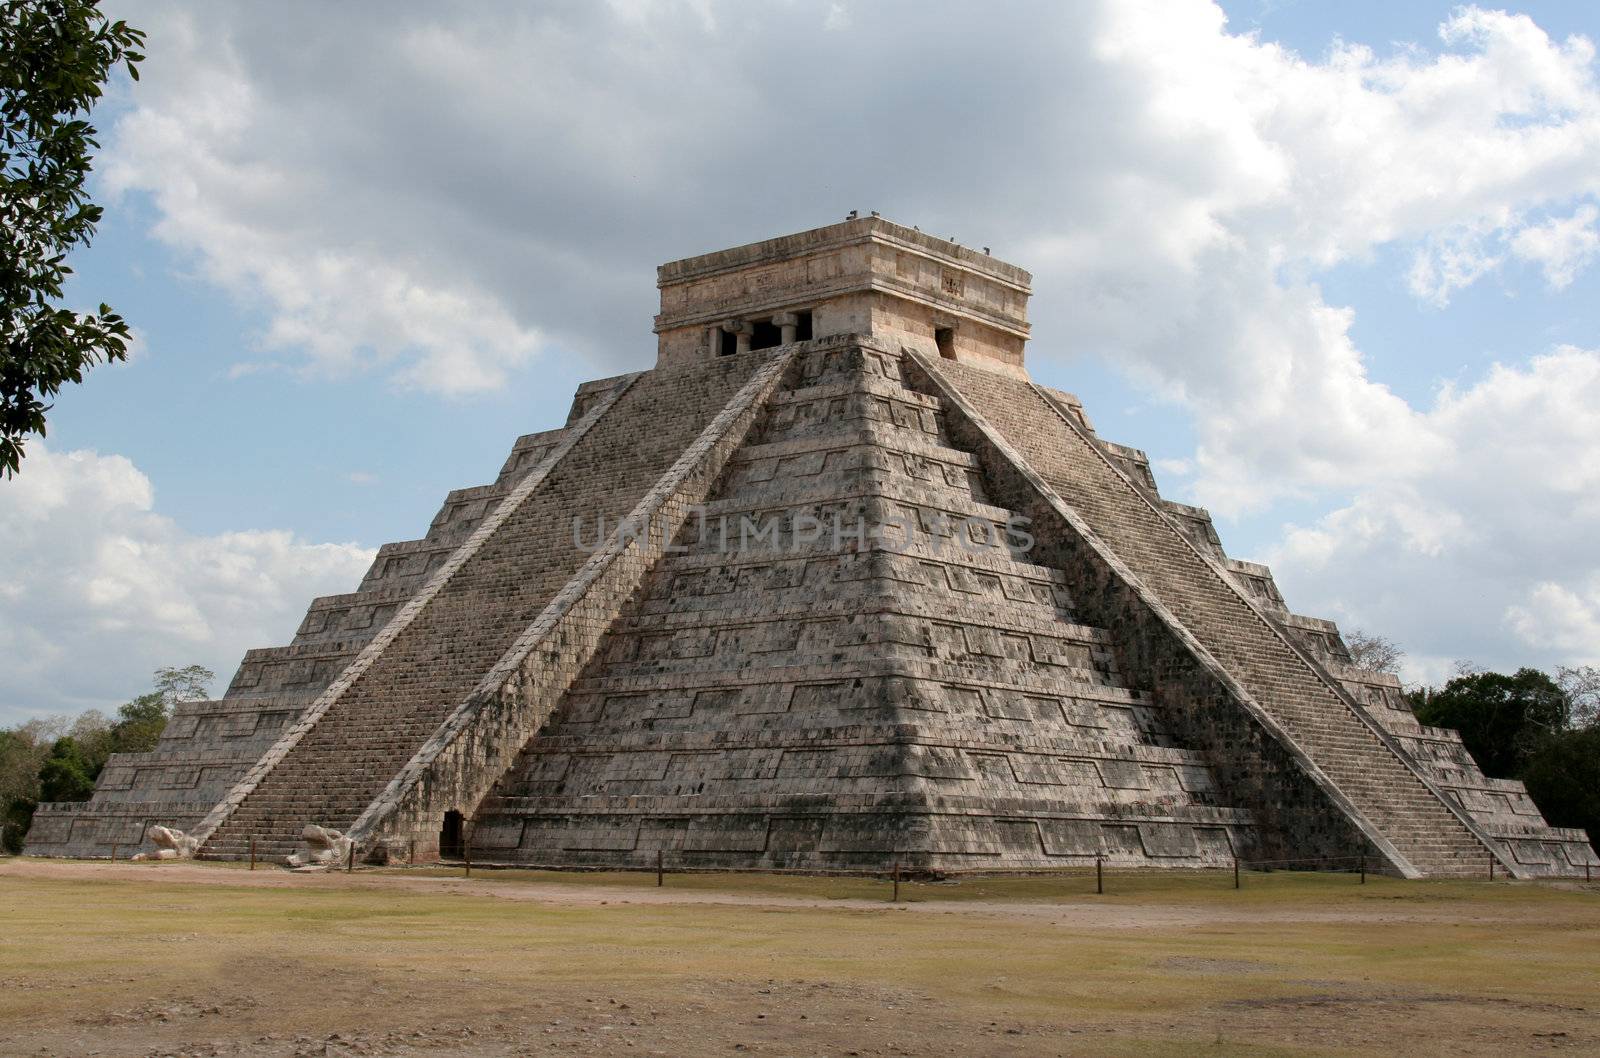 The temple of Kukulkan at Chichen Itza, (Mayan Ruins) in Mexico.
